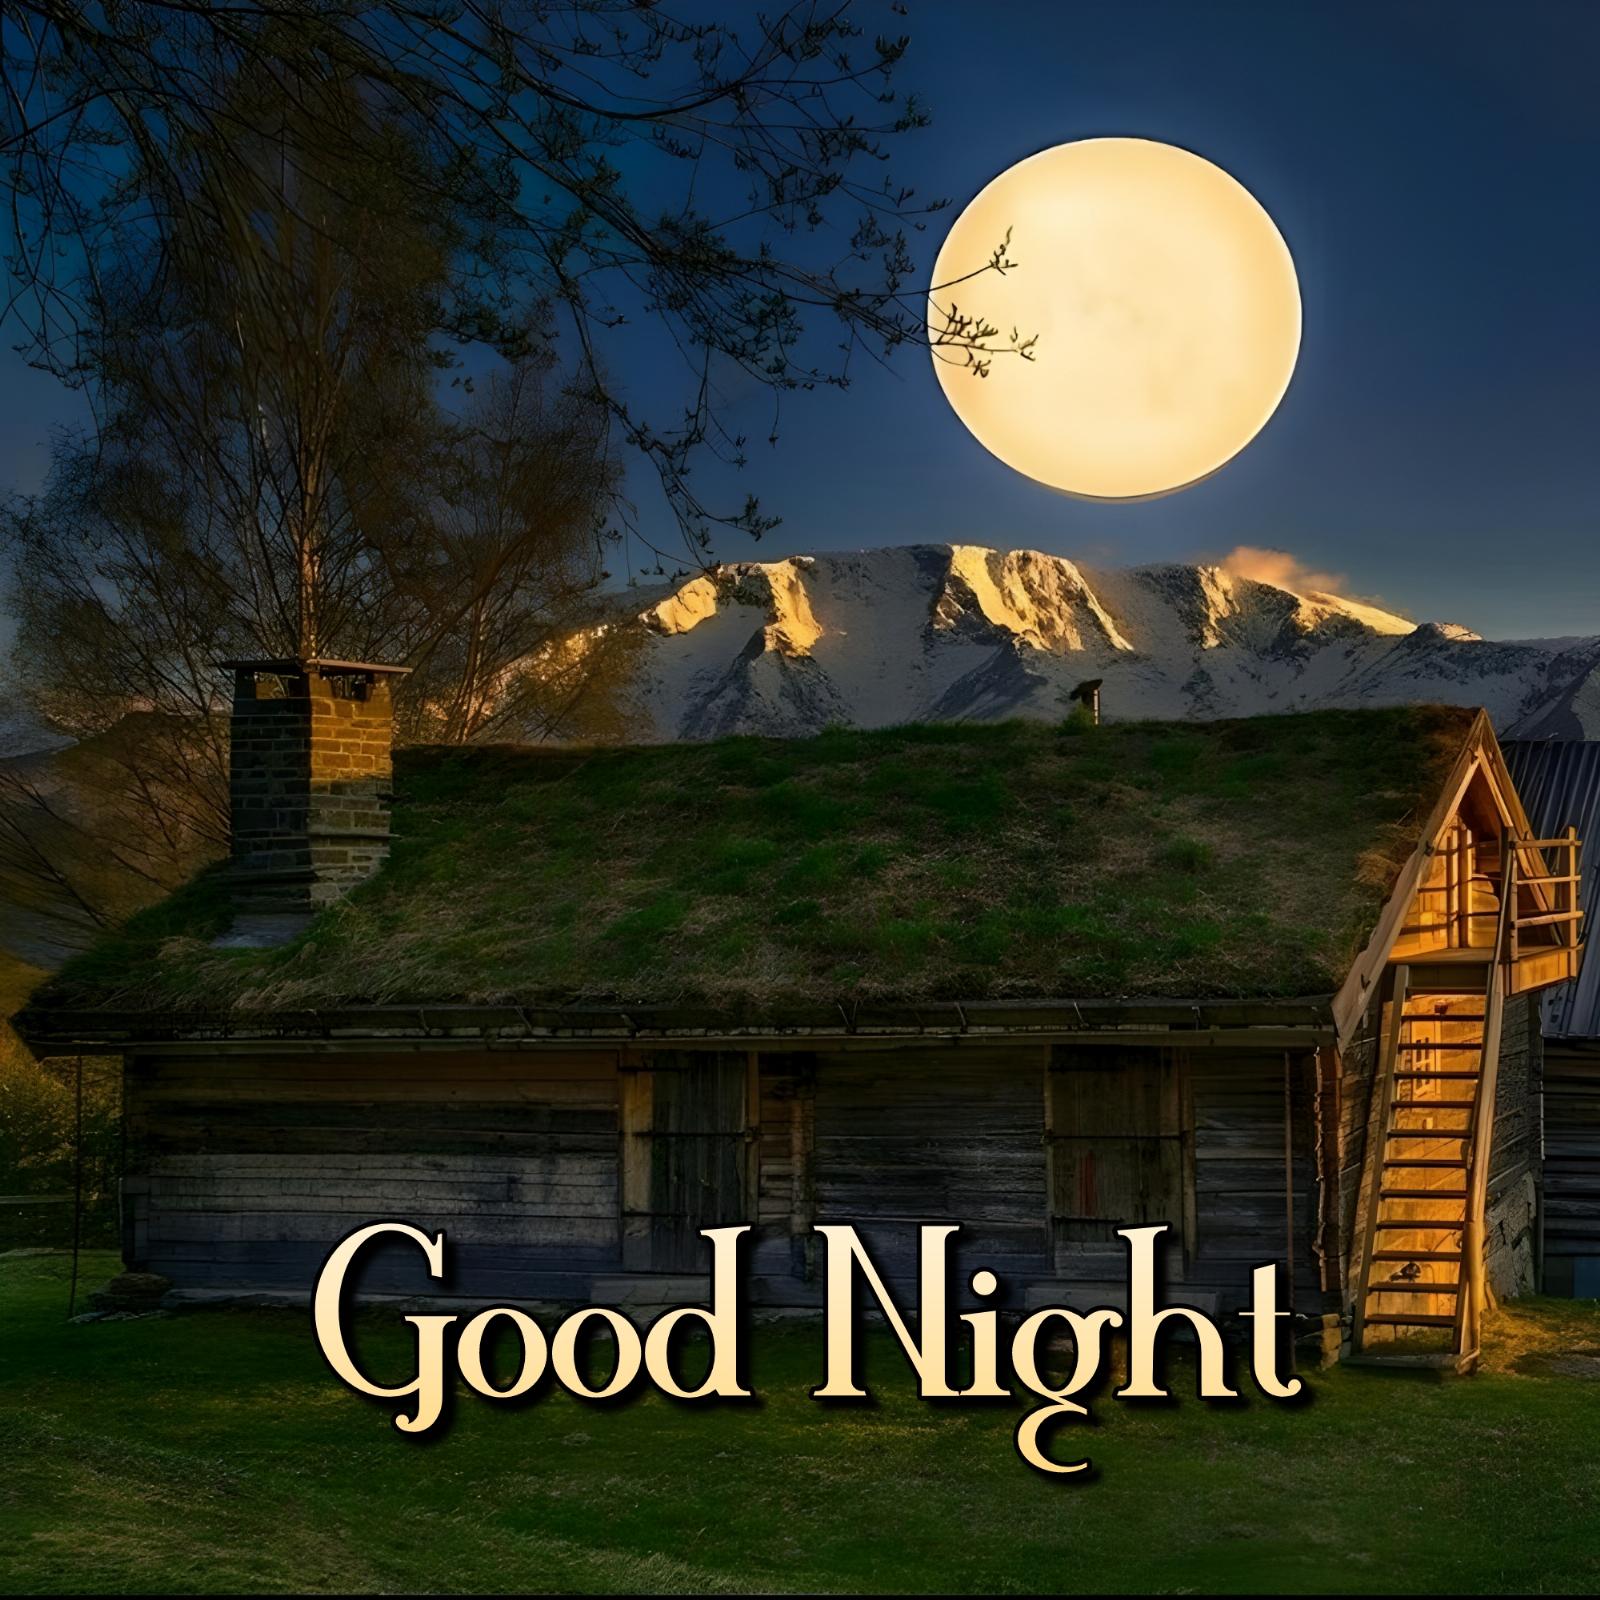 Good Night Full Moon Old House Images